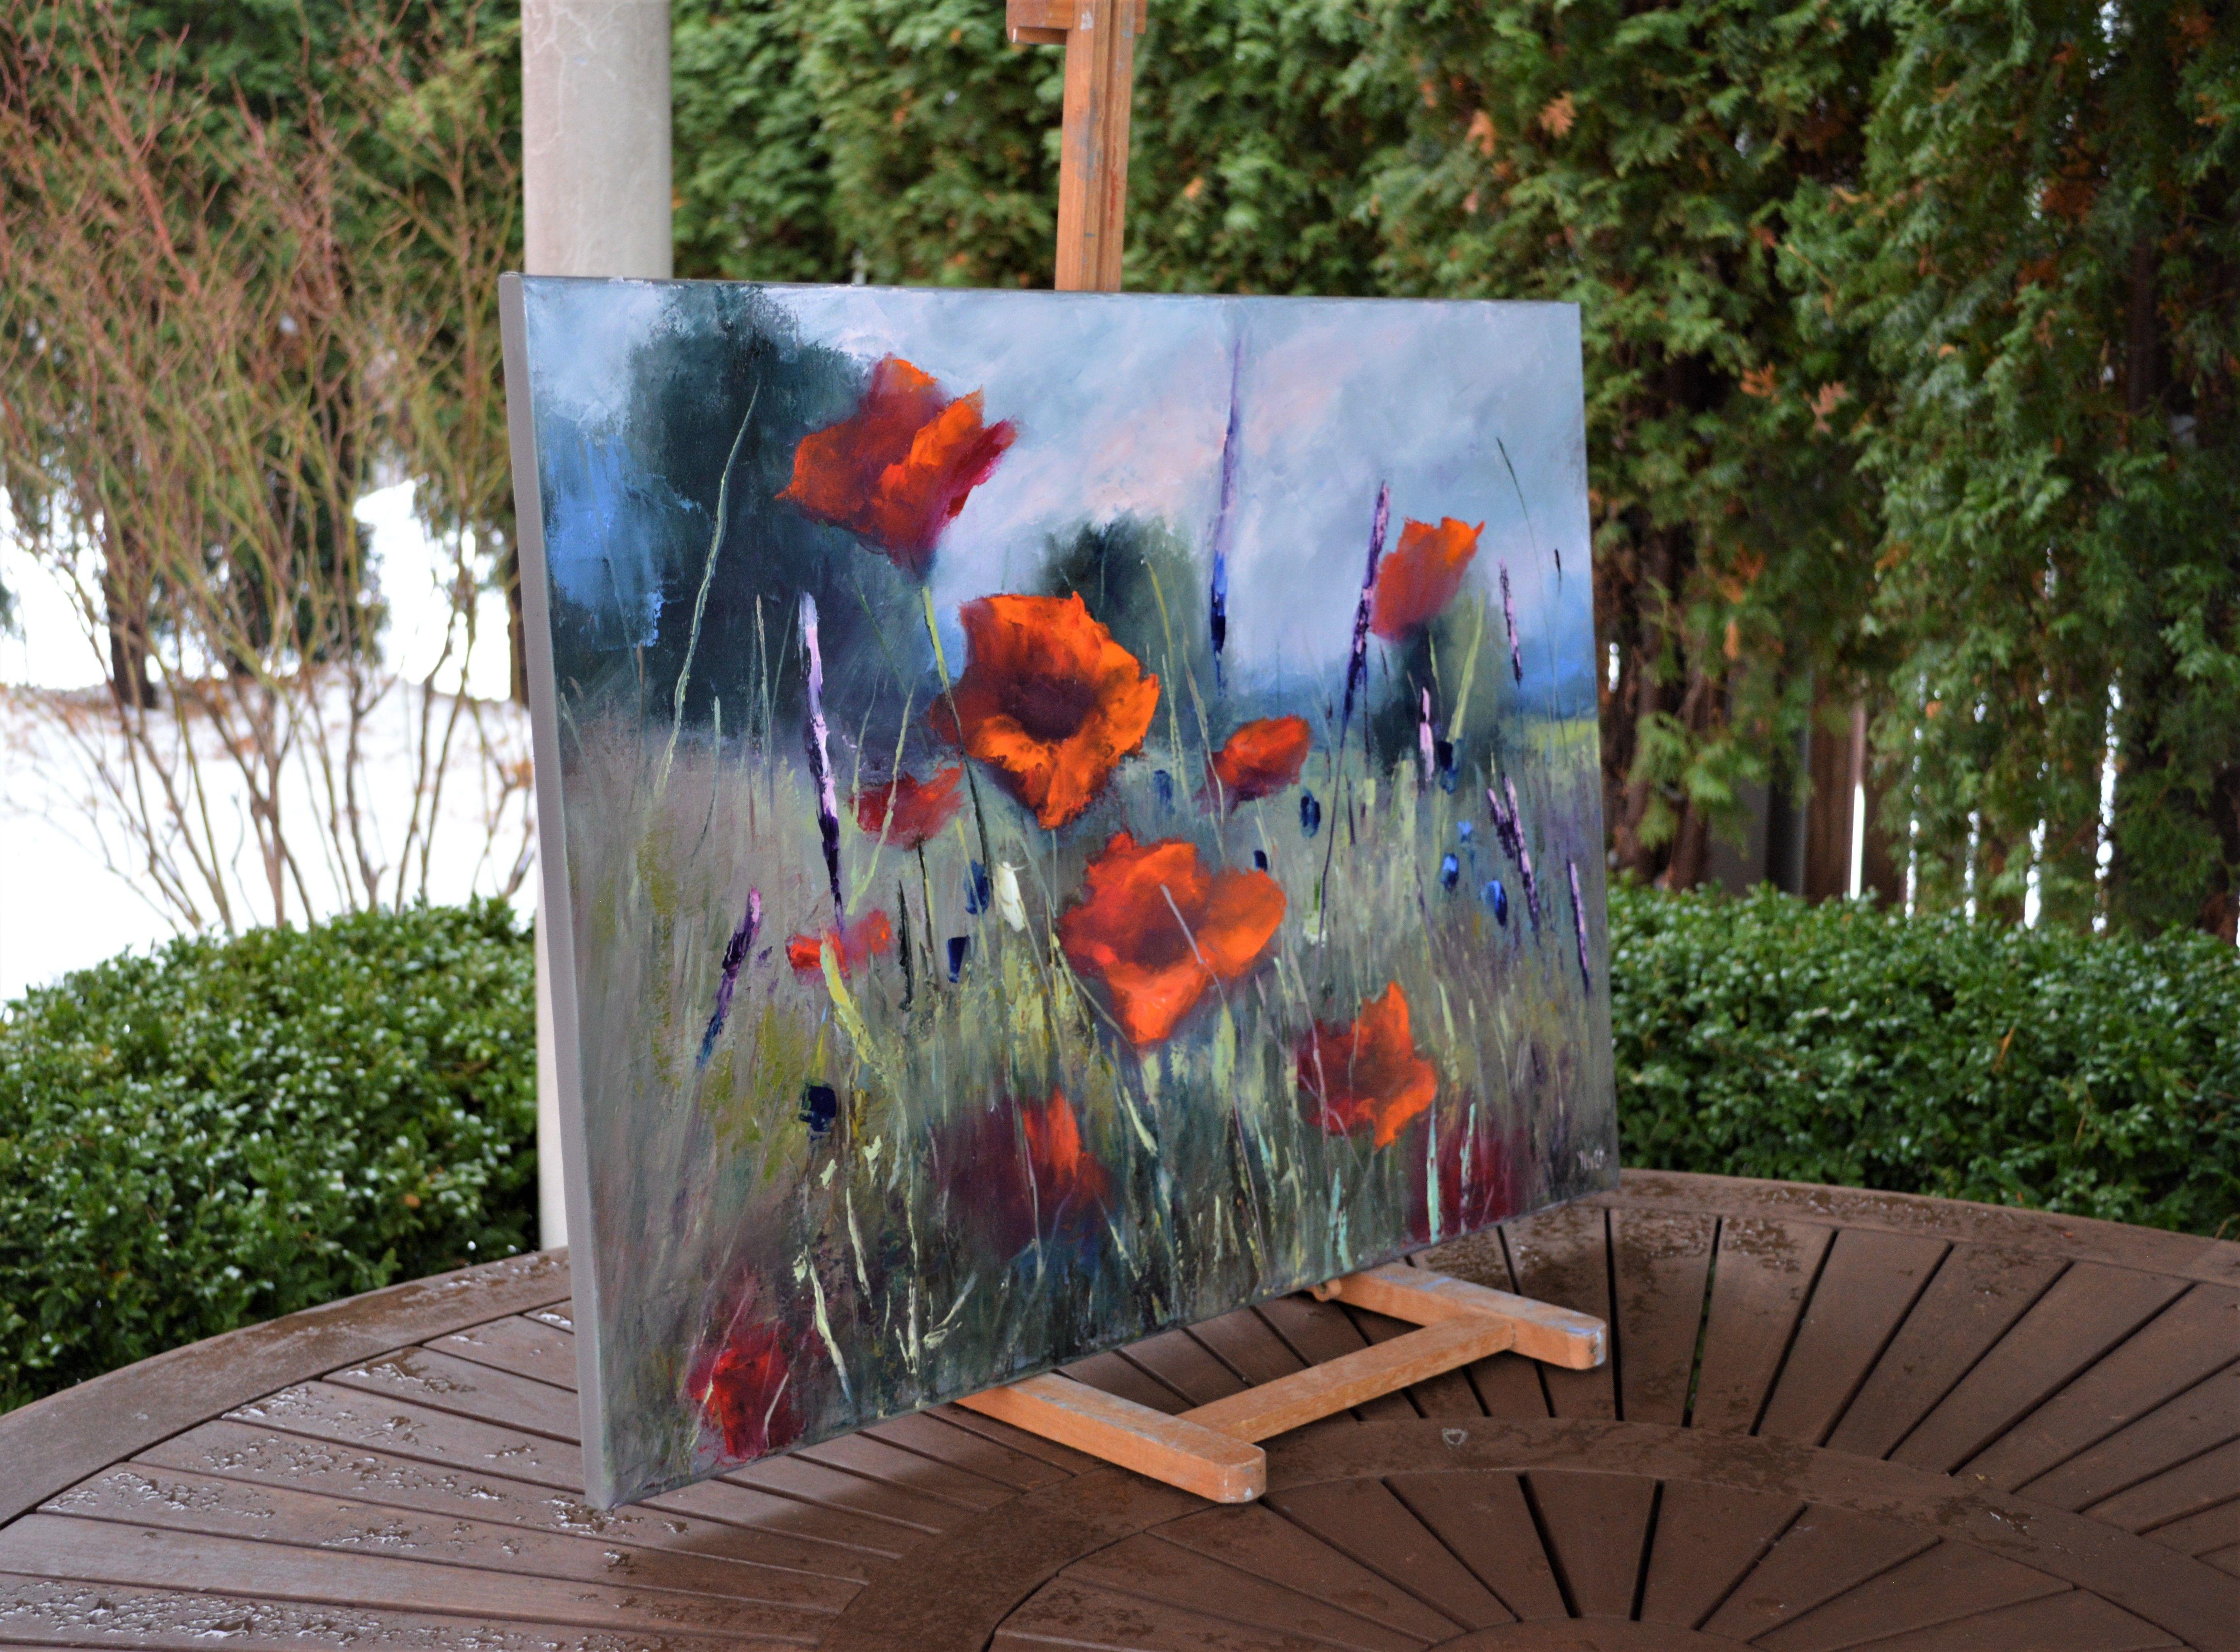 In this oil painting, I have captured the wild spirit of a meadow, brimming with vibrant poppies. My brushstrokes dance with expressionism and impressionism, while fine art techniques ground the work in realism. Every stroke is infused with